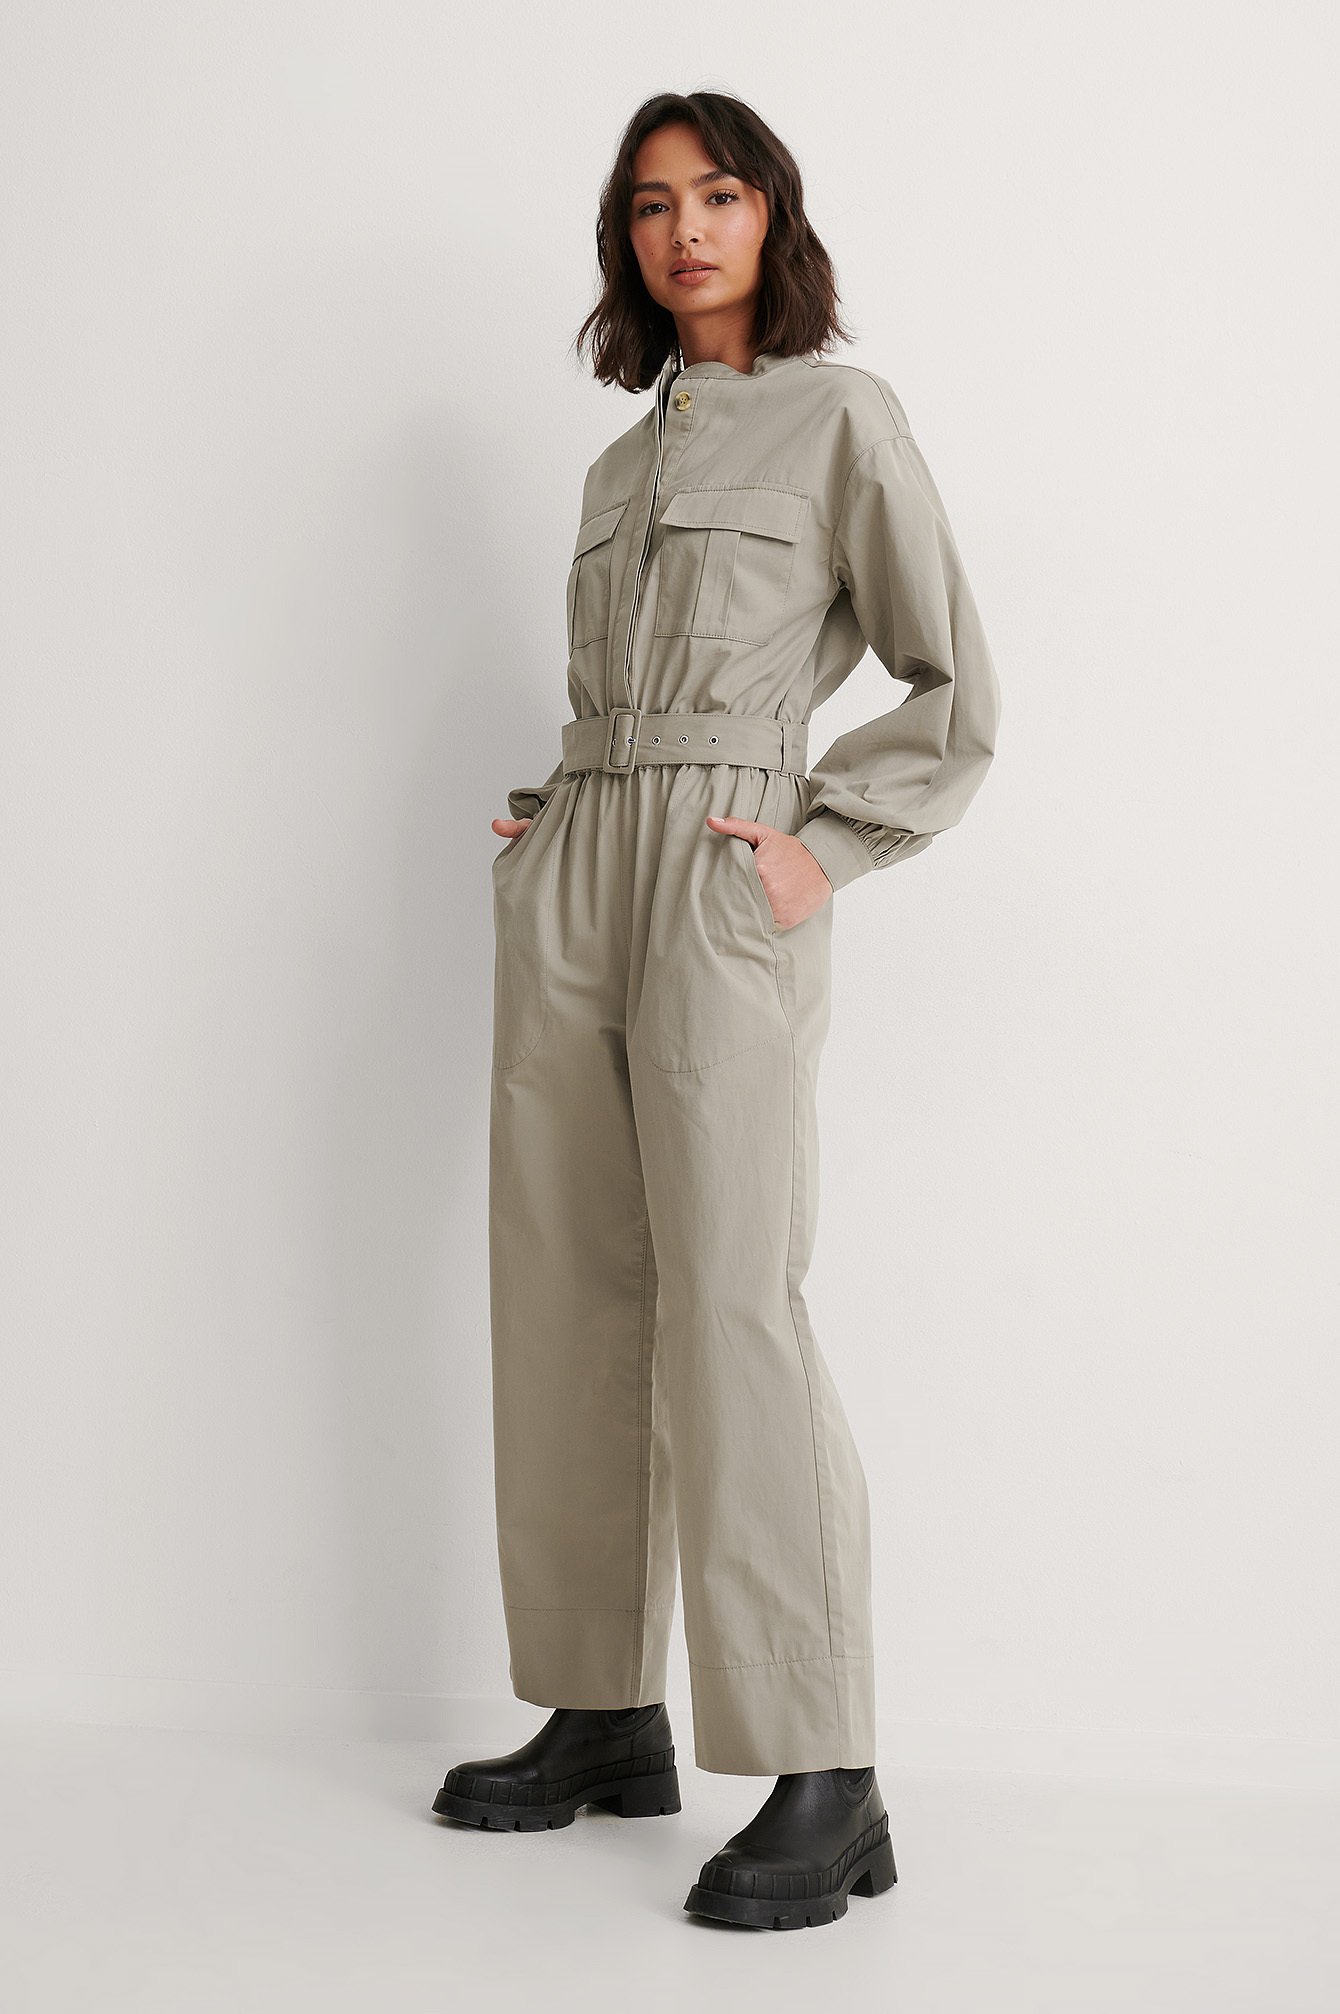 Relaxed Belted Jumpsuit Outfit.